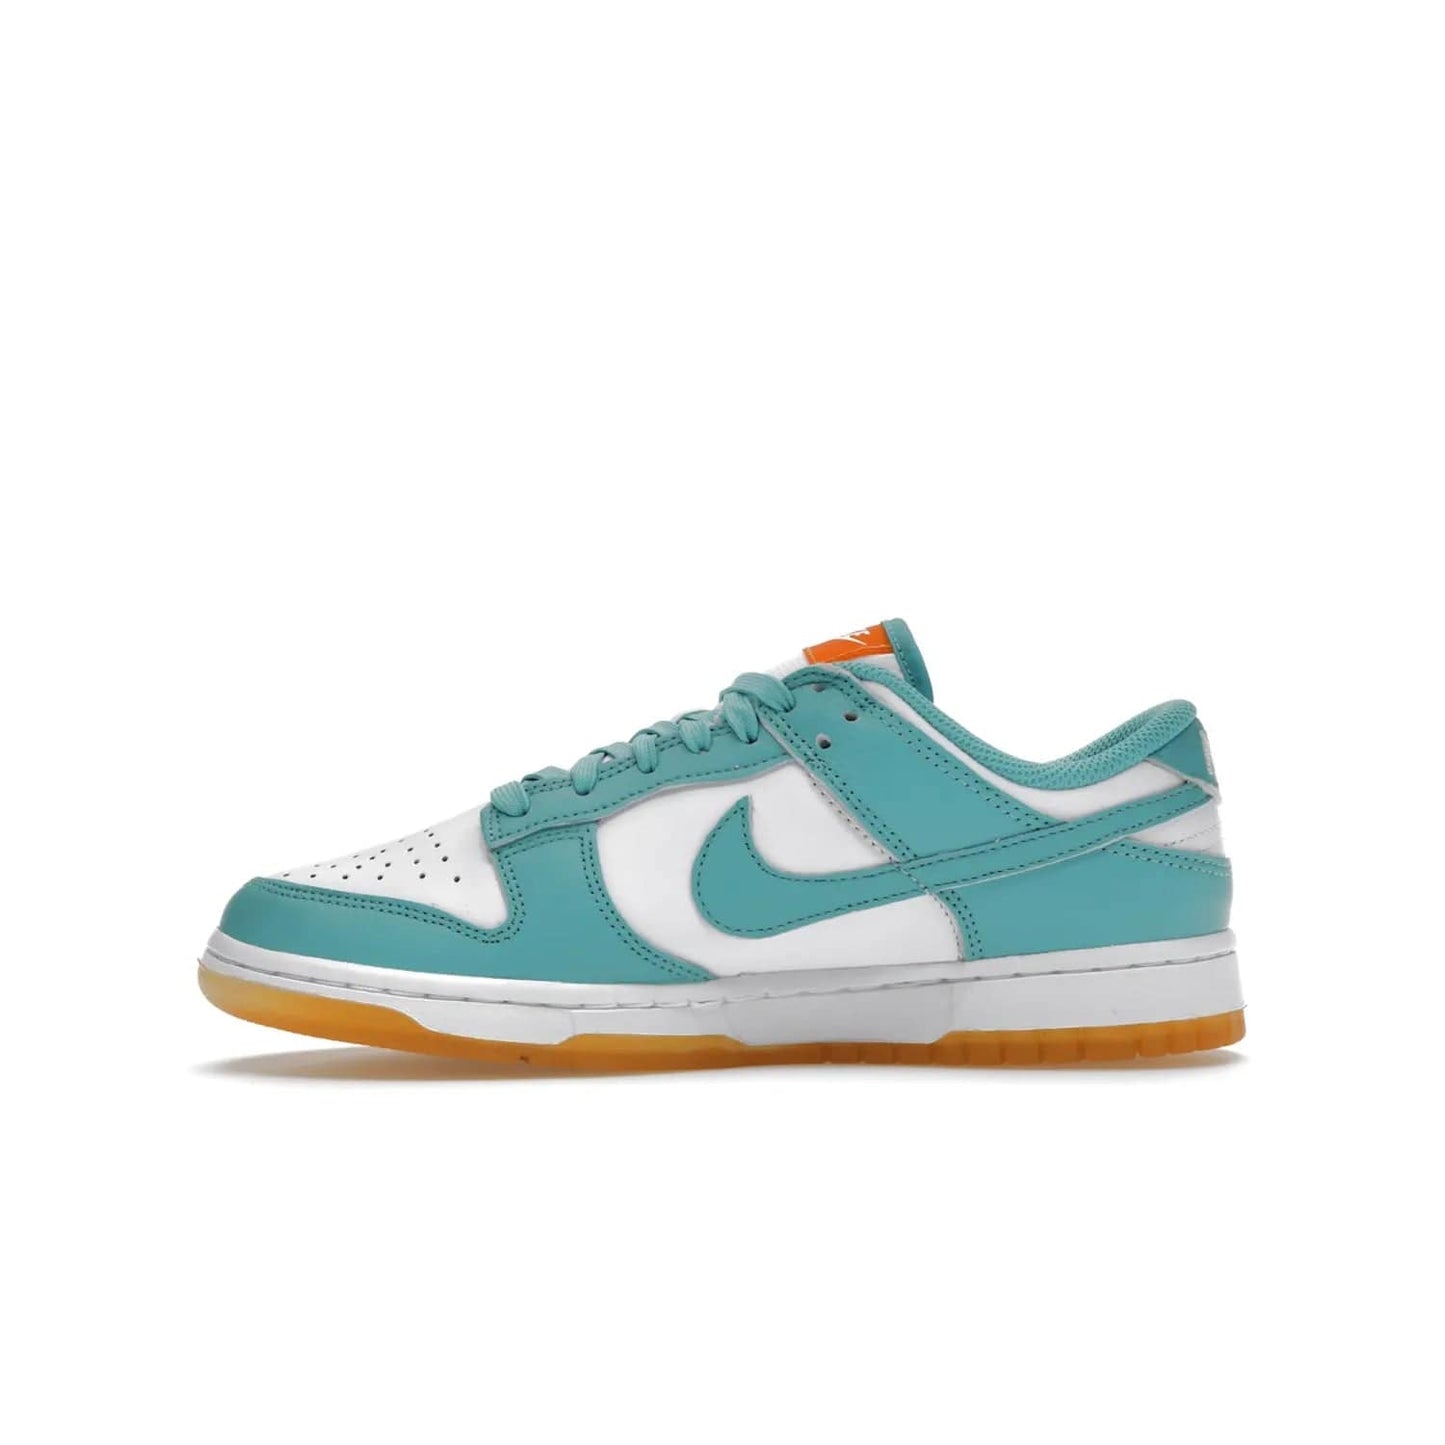 Nike Dunk Low Teal Zeal (Women's) - Image 19 - Only at www.BallersClubKickz.com - A white leather upper with teal overlays and Swooshes, plus yellow and embroidered accents make the Nike Dunk Low Teal Zeal (Women's) the perfect statement piece for any wardrobe.